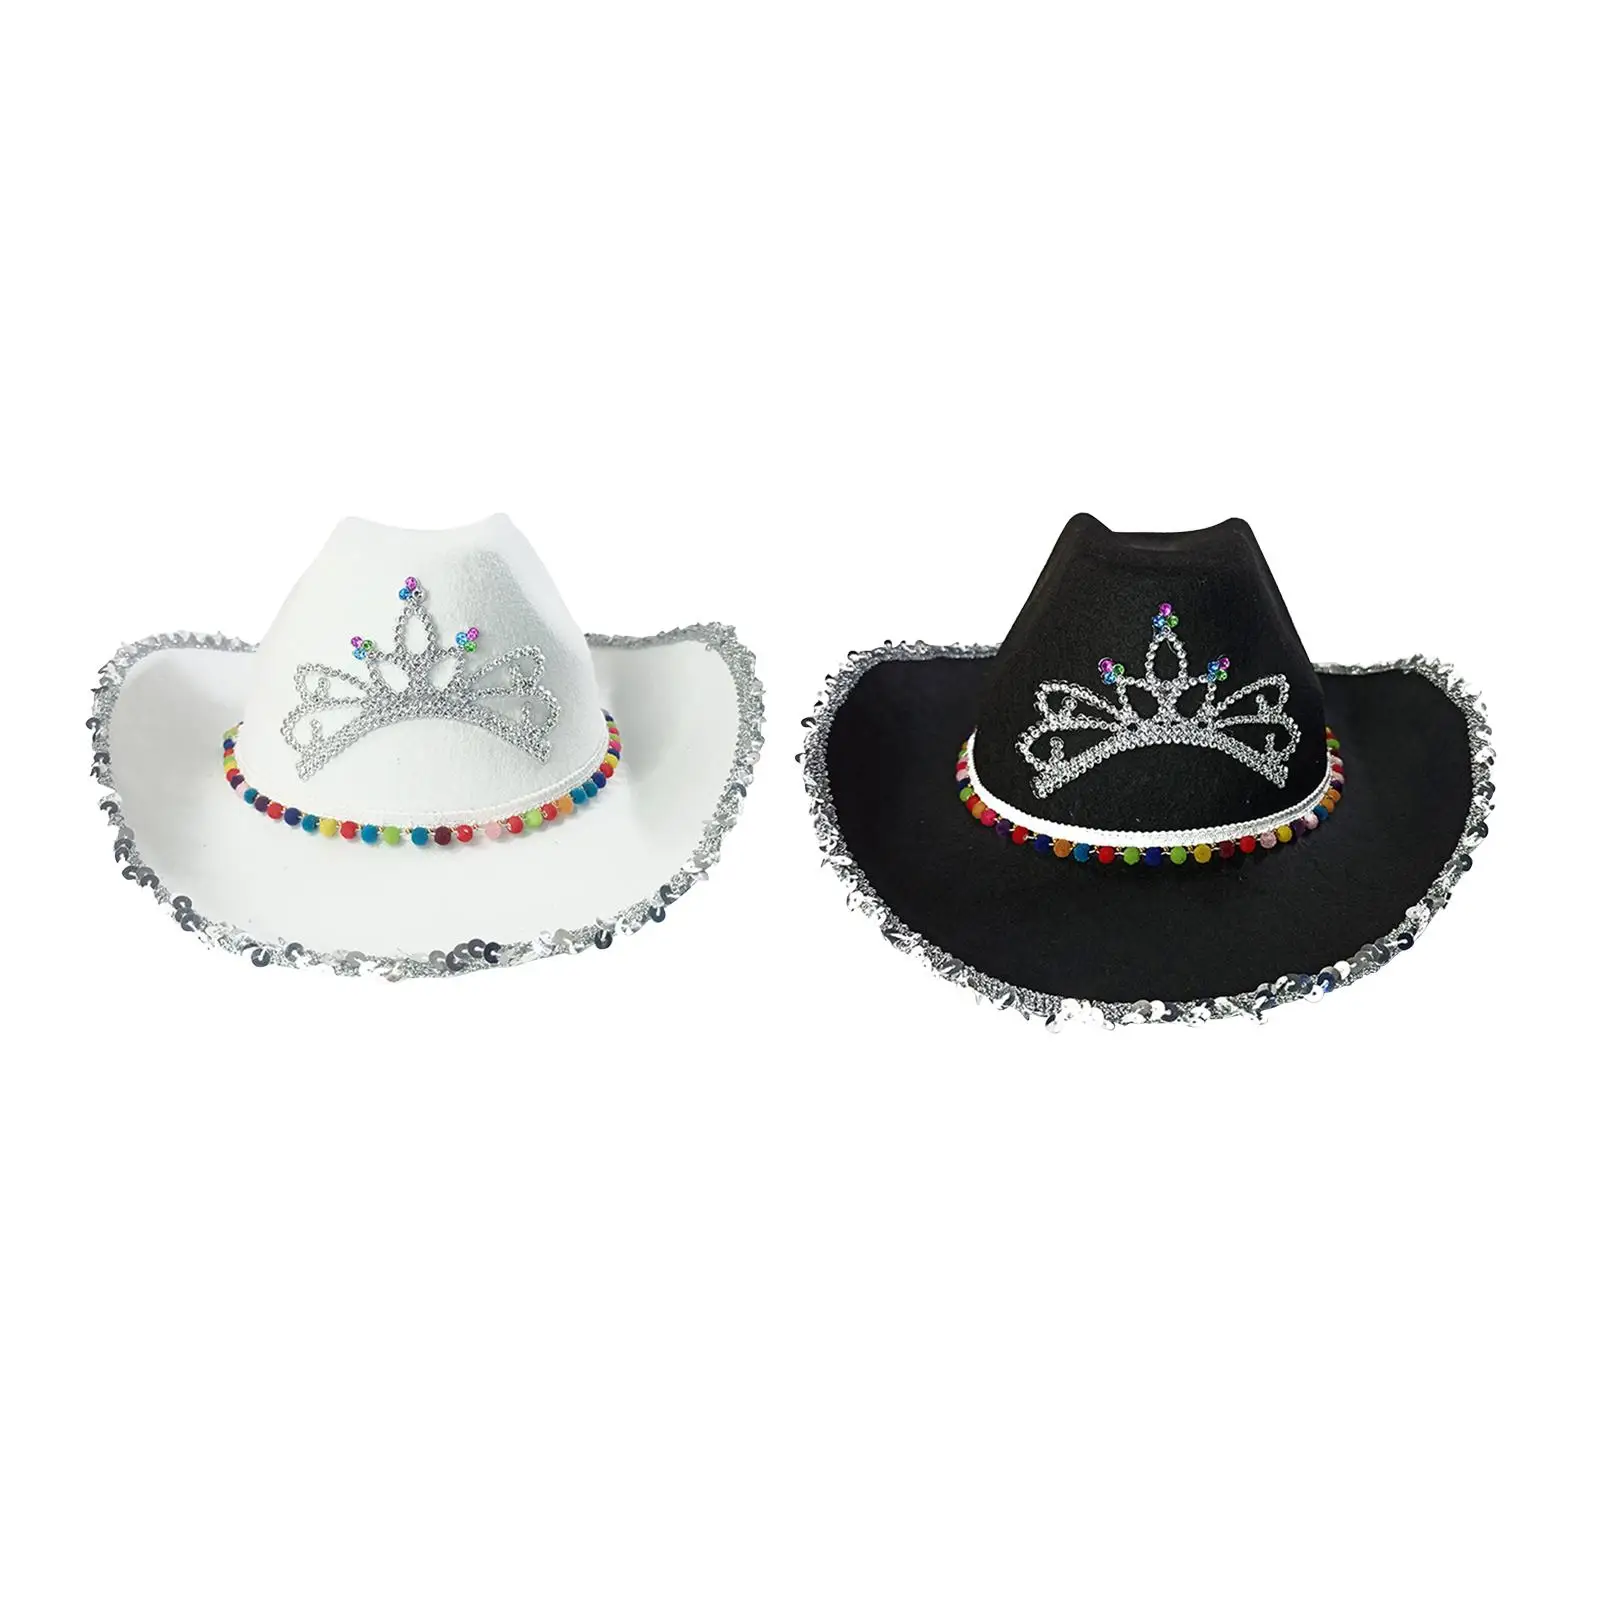 Fashion Western Cowboy Size Fits Most Fancy Dress Props for Party Cowgirl Holiday Cosplay Carnival